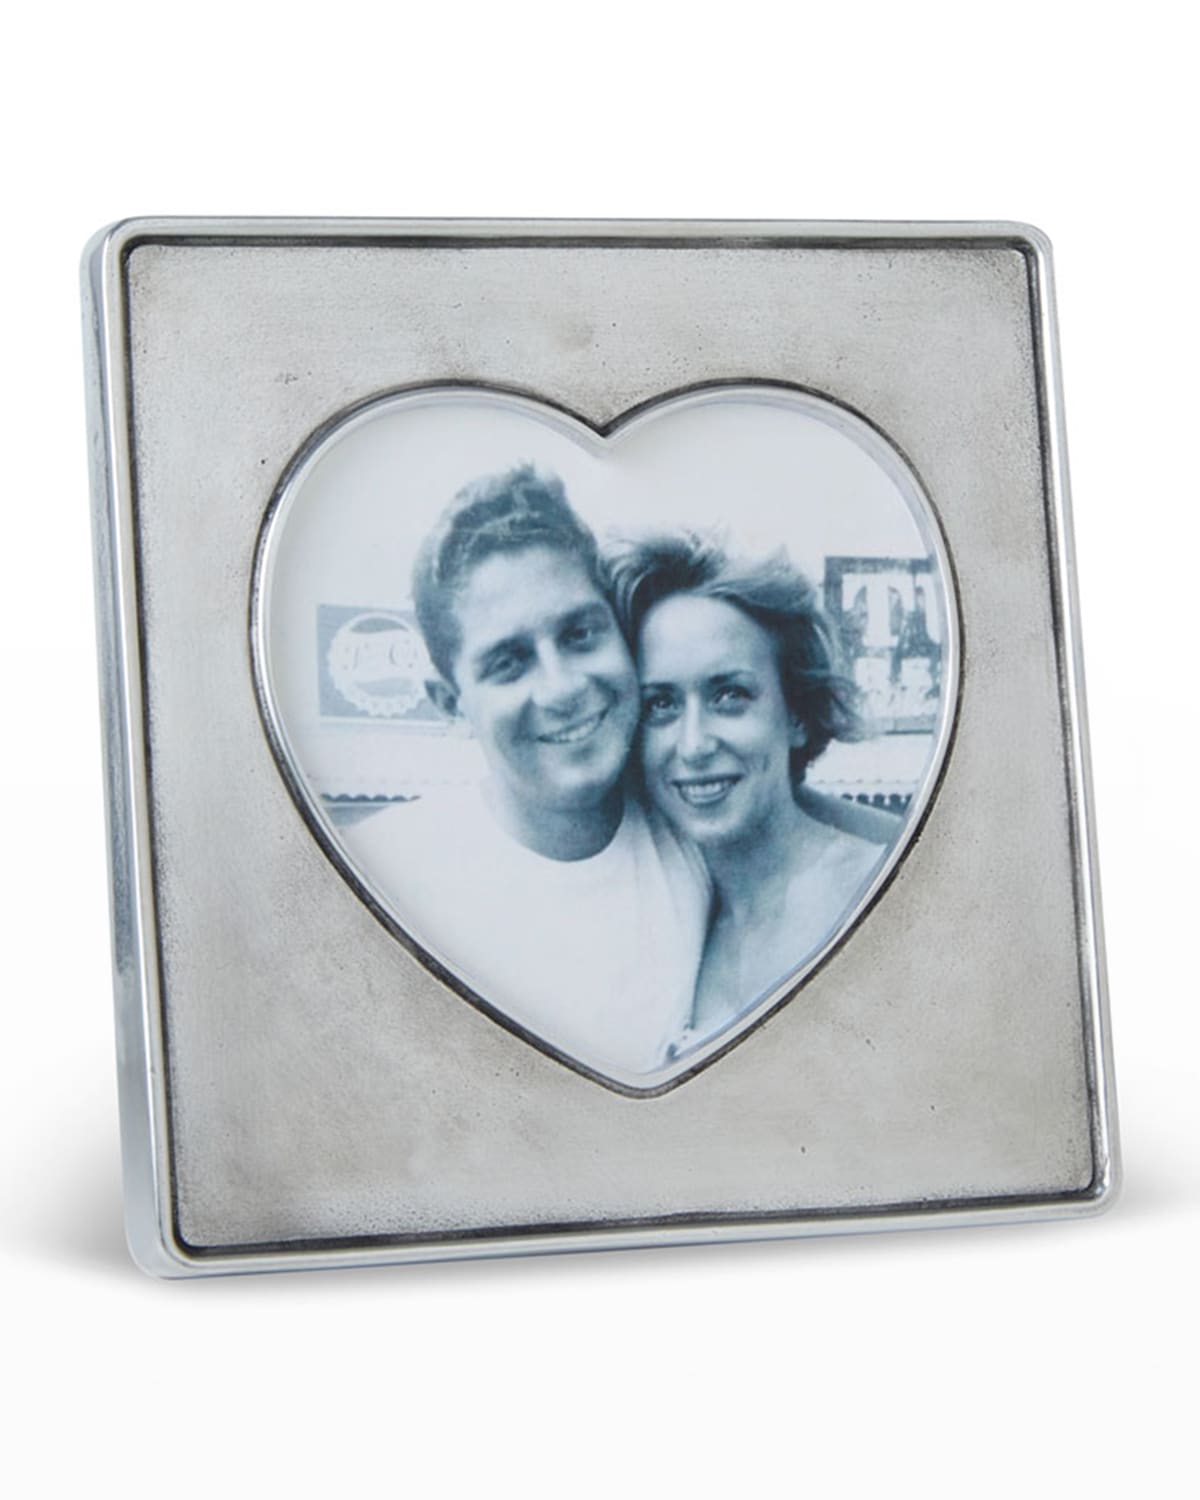 Match Heart In Square Frame